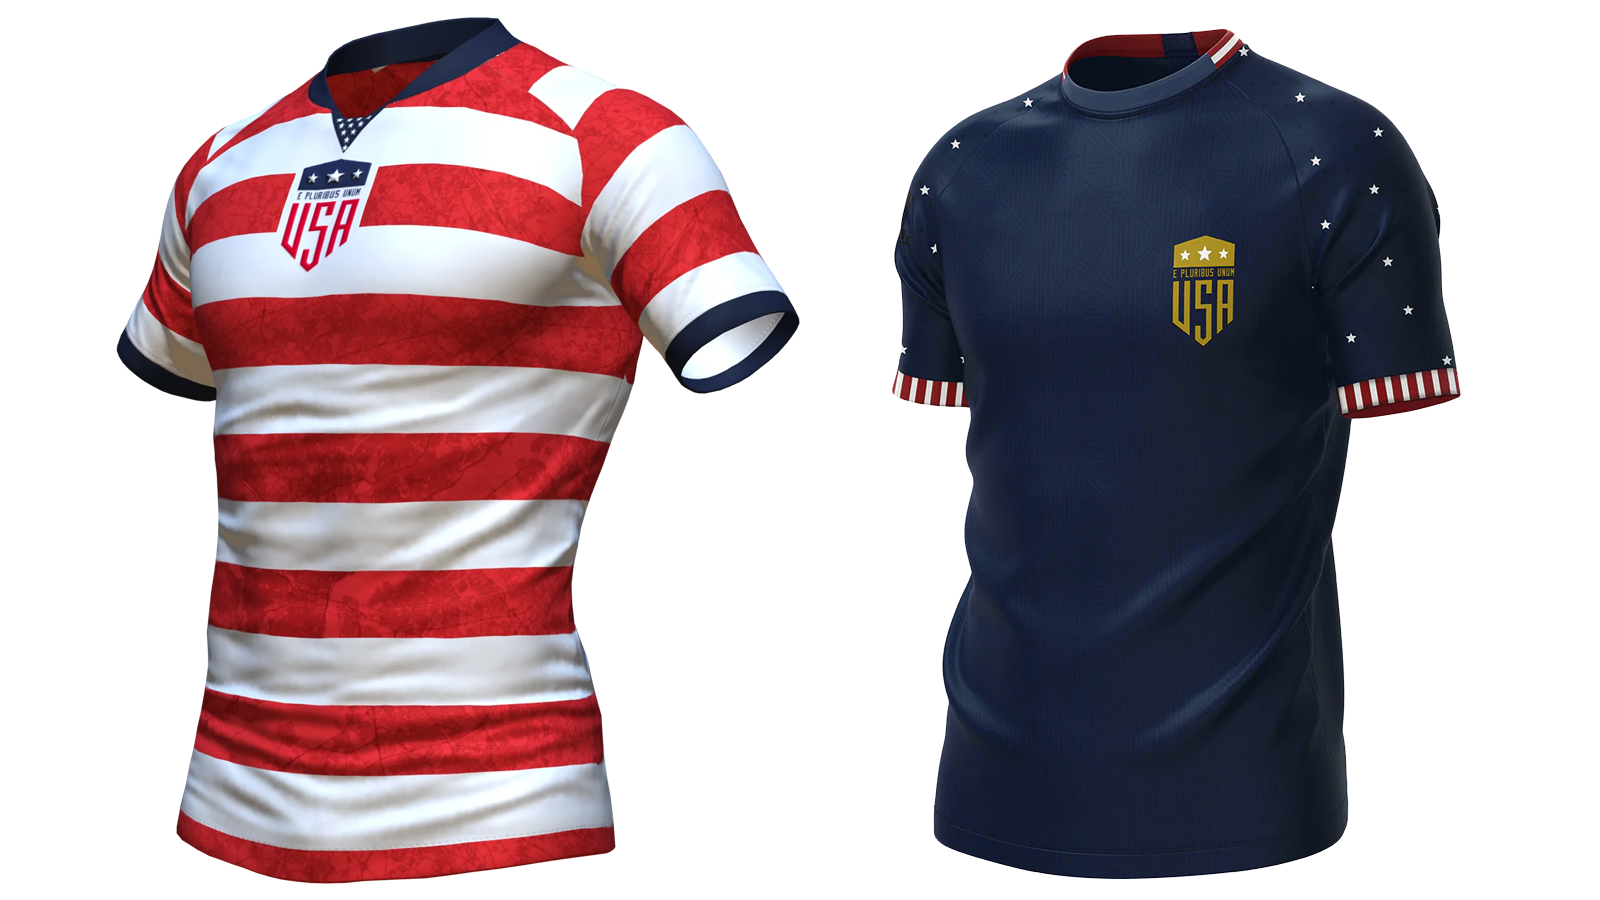 U.S. Soccer needs an identity, and the Waldo jersey is the answer